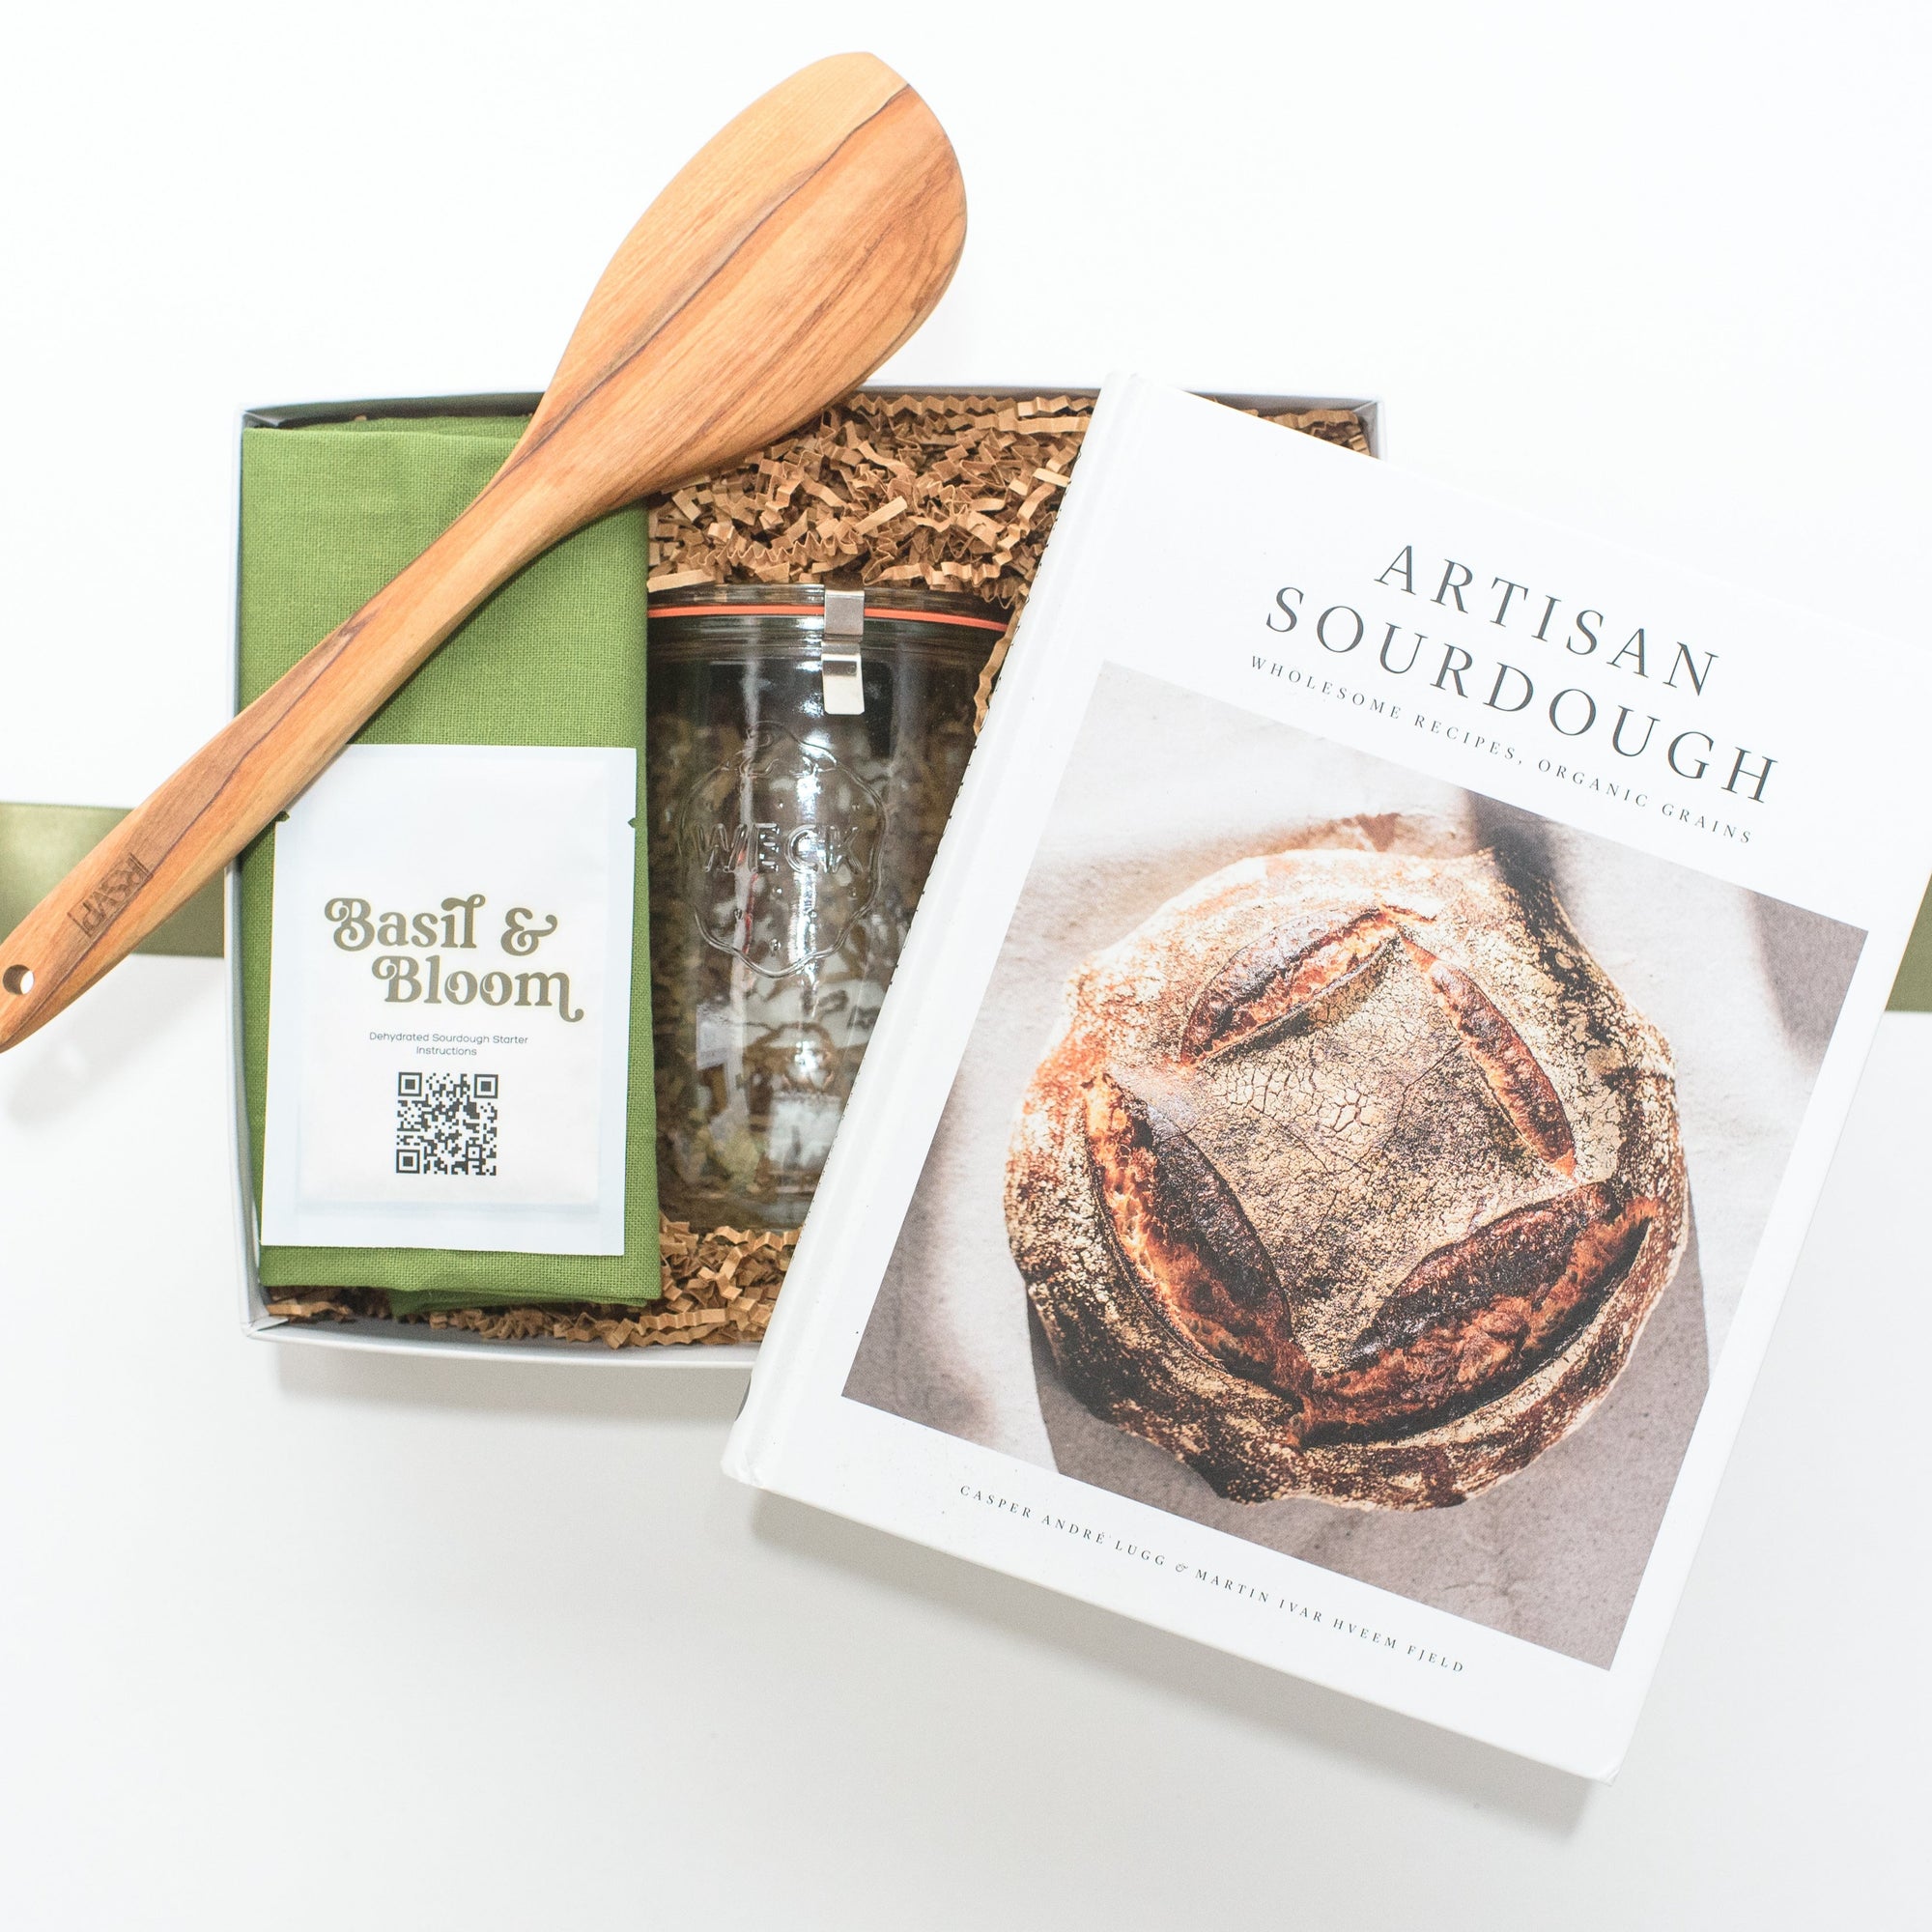 Sourdough Starter Gift Box, Curated Gift Box, Sourdough Bread Baking, Foodie Gift Boxes, Unique Client Gifts, From Scratch Cooking Gifts, Homesteading